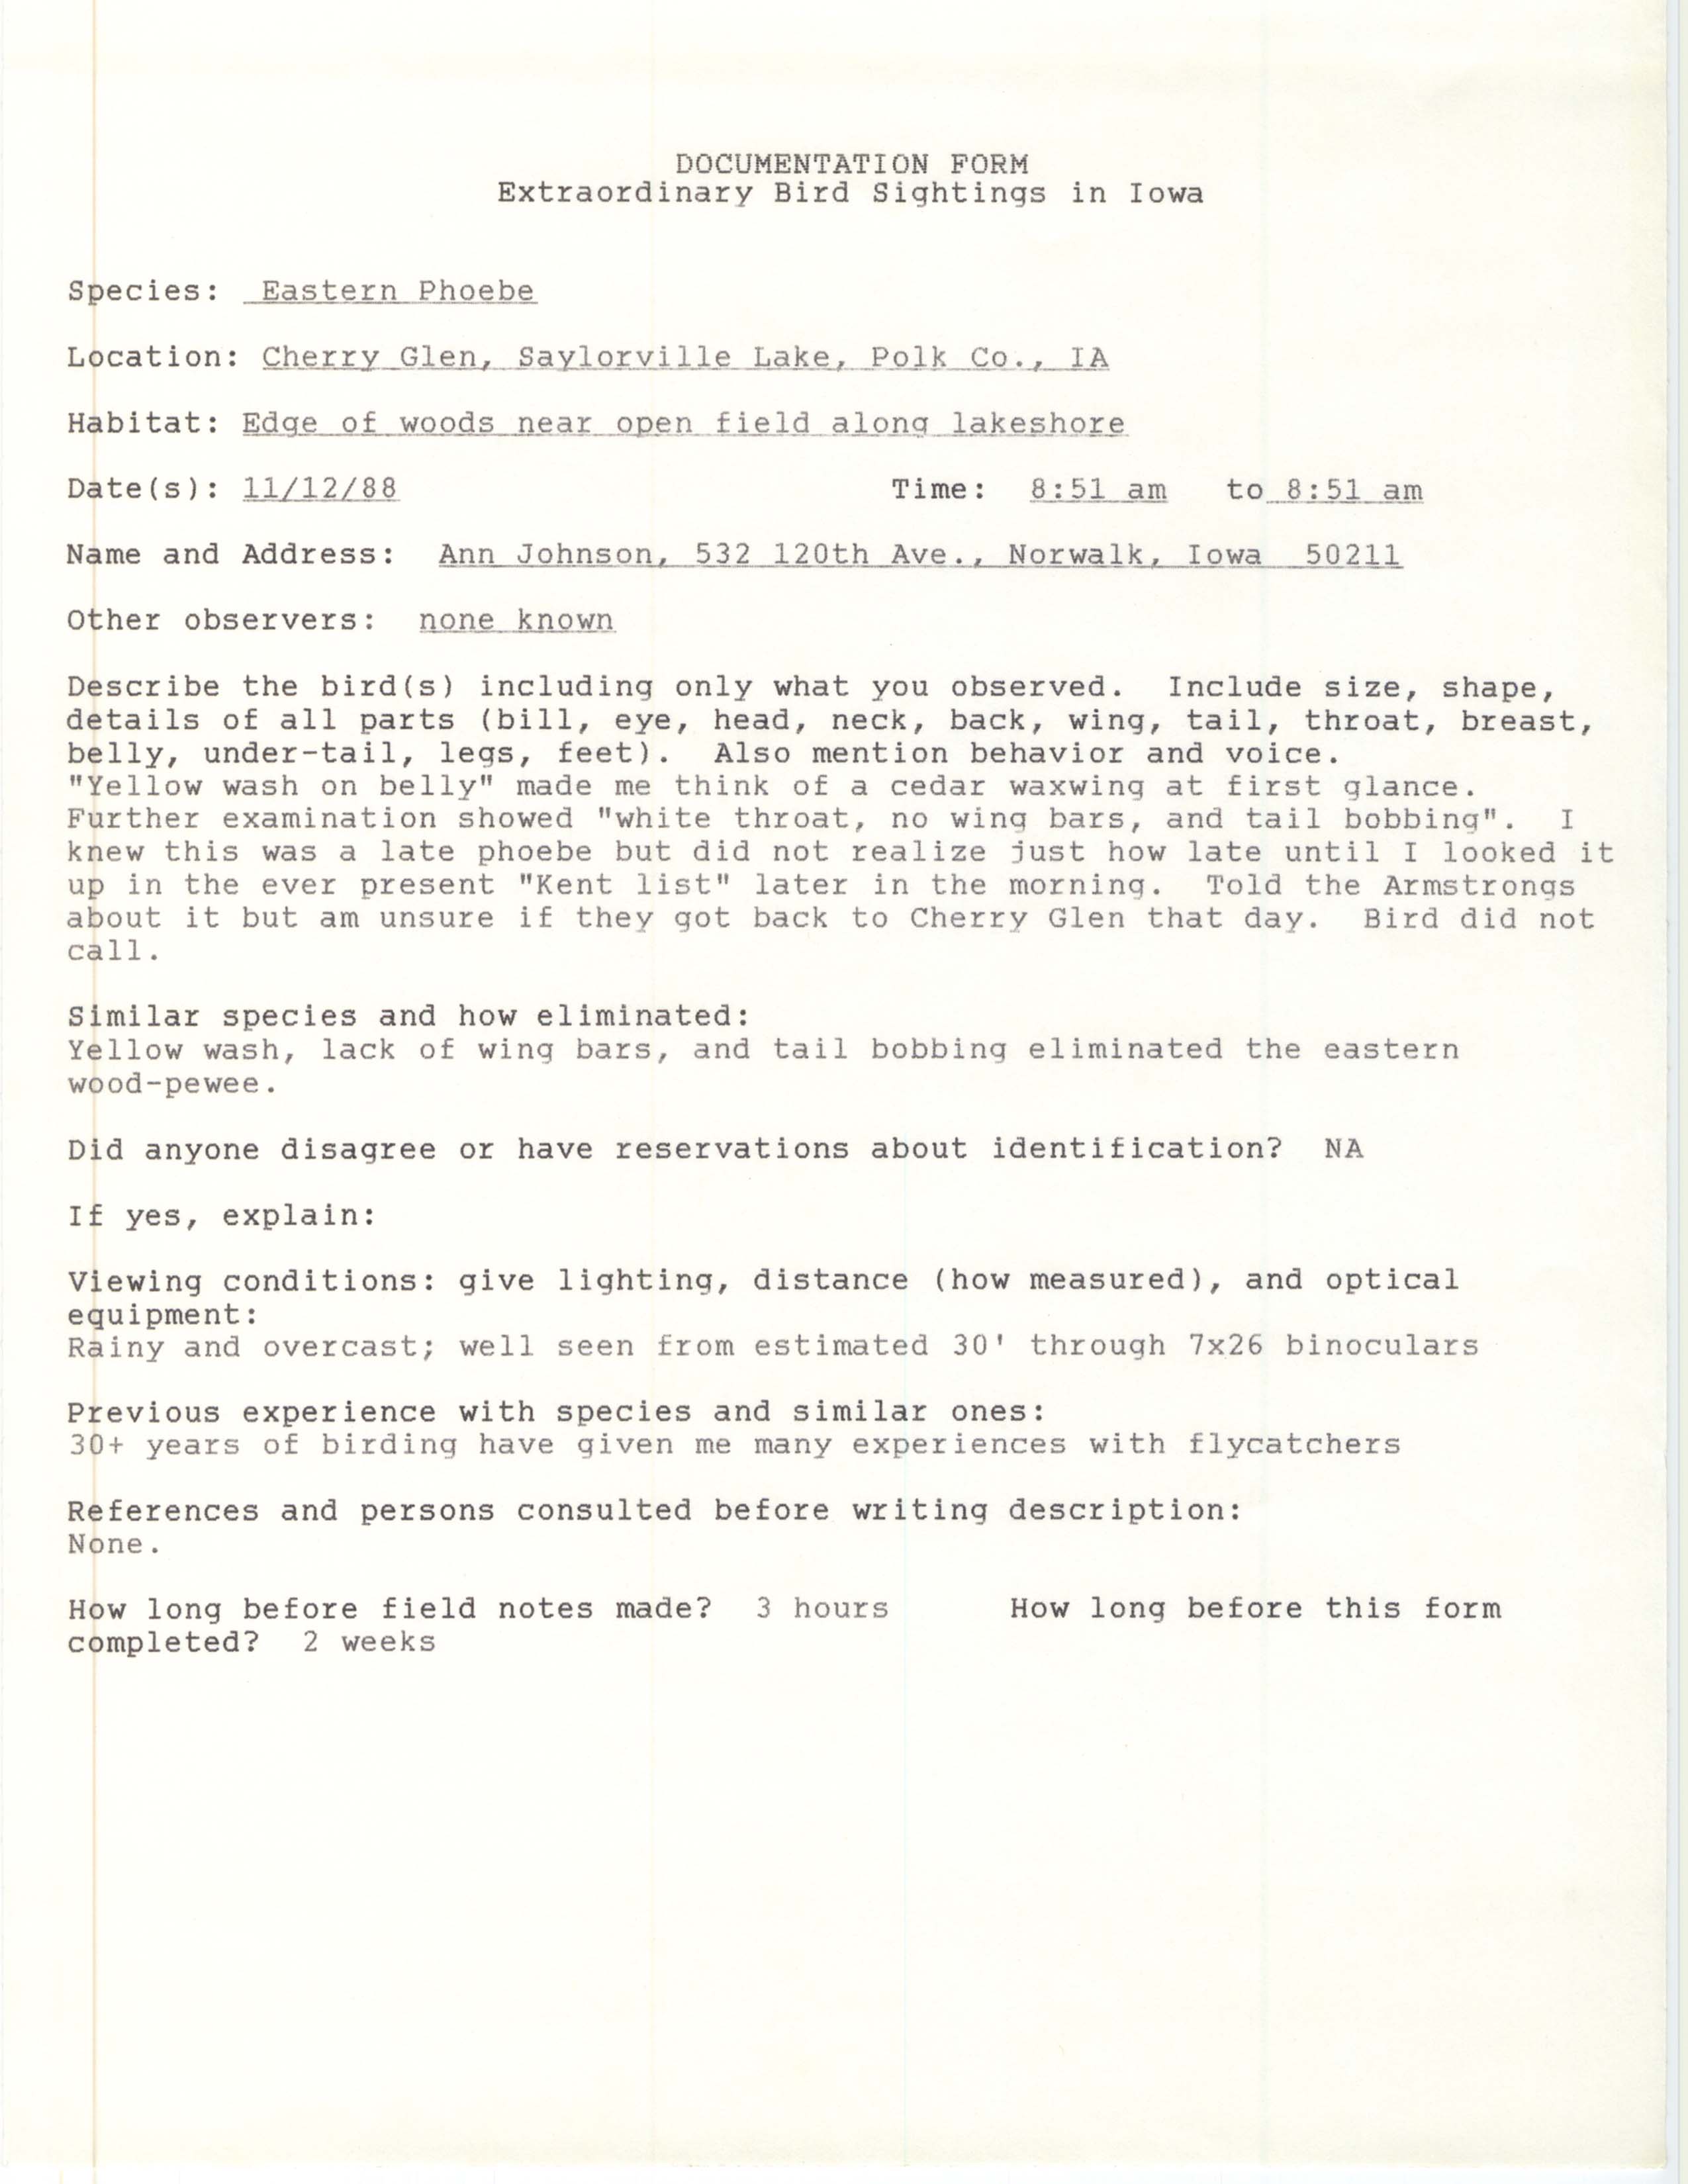 Rare bird documentation form for Eastern Phoebe at Cherry Glen Recreation Area at Saylorville Lake, 1988